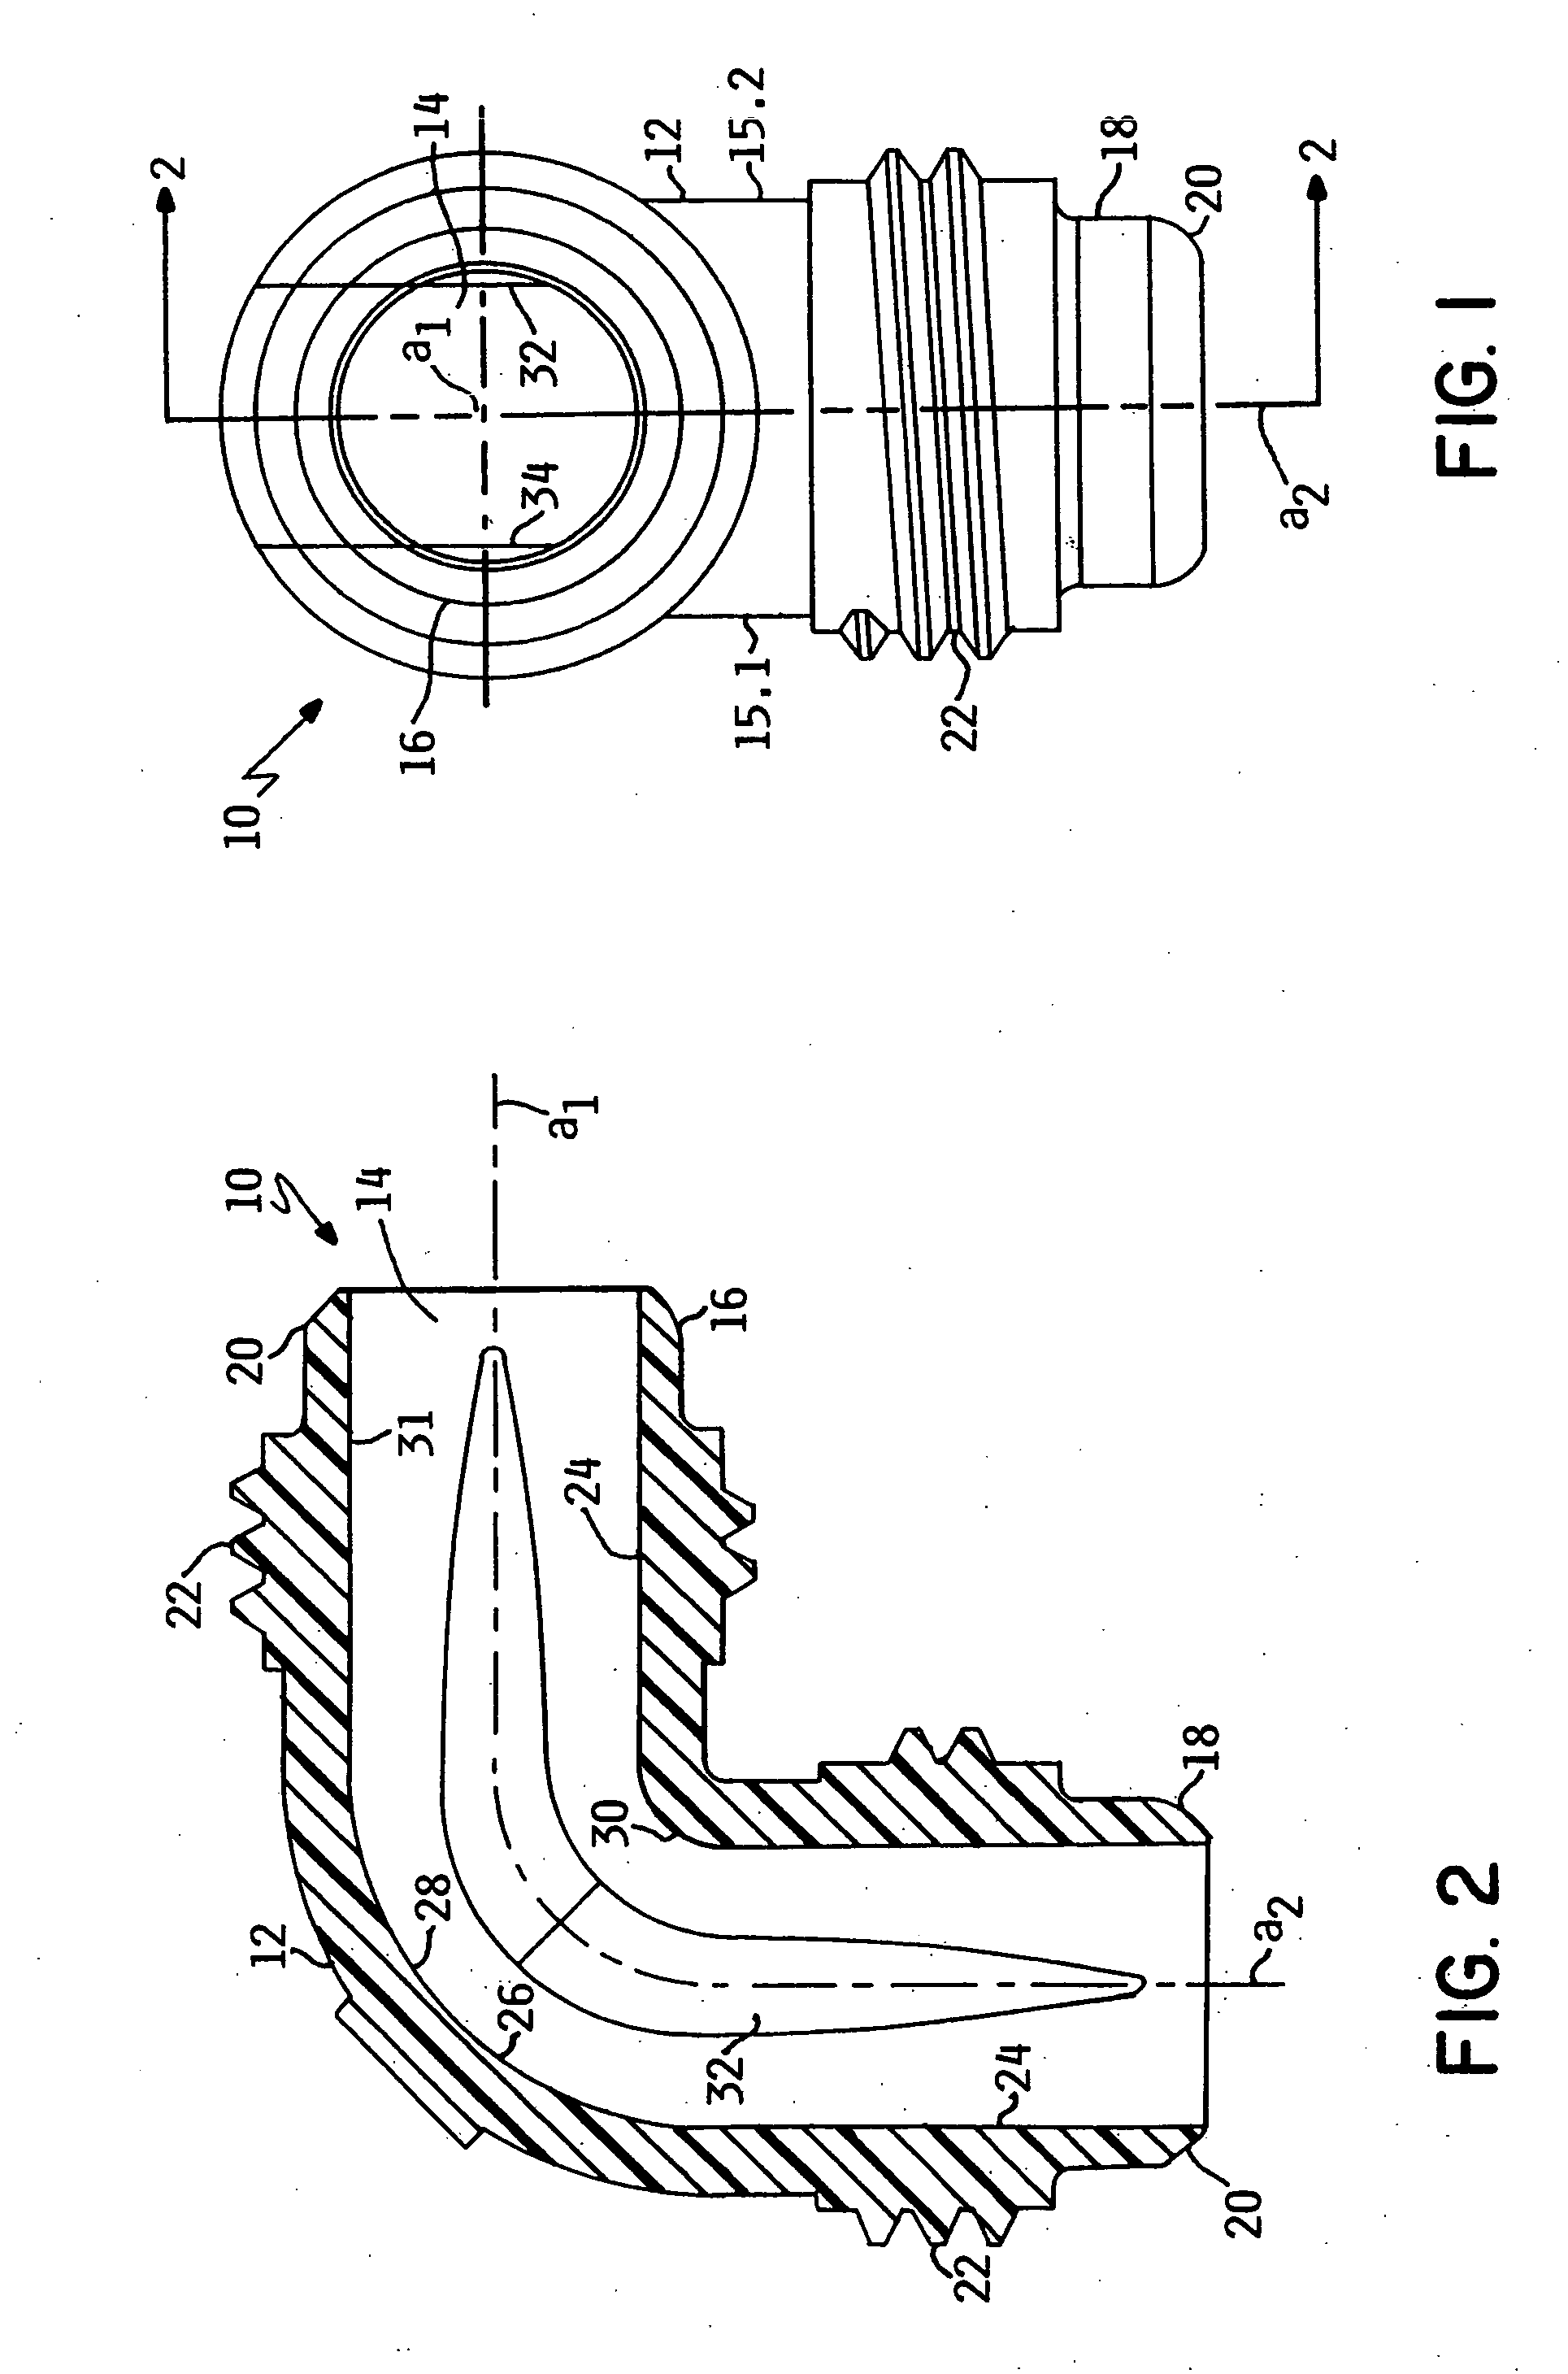 Process and apparatus for molding polymer fittings